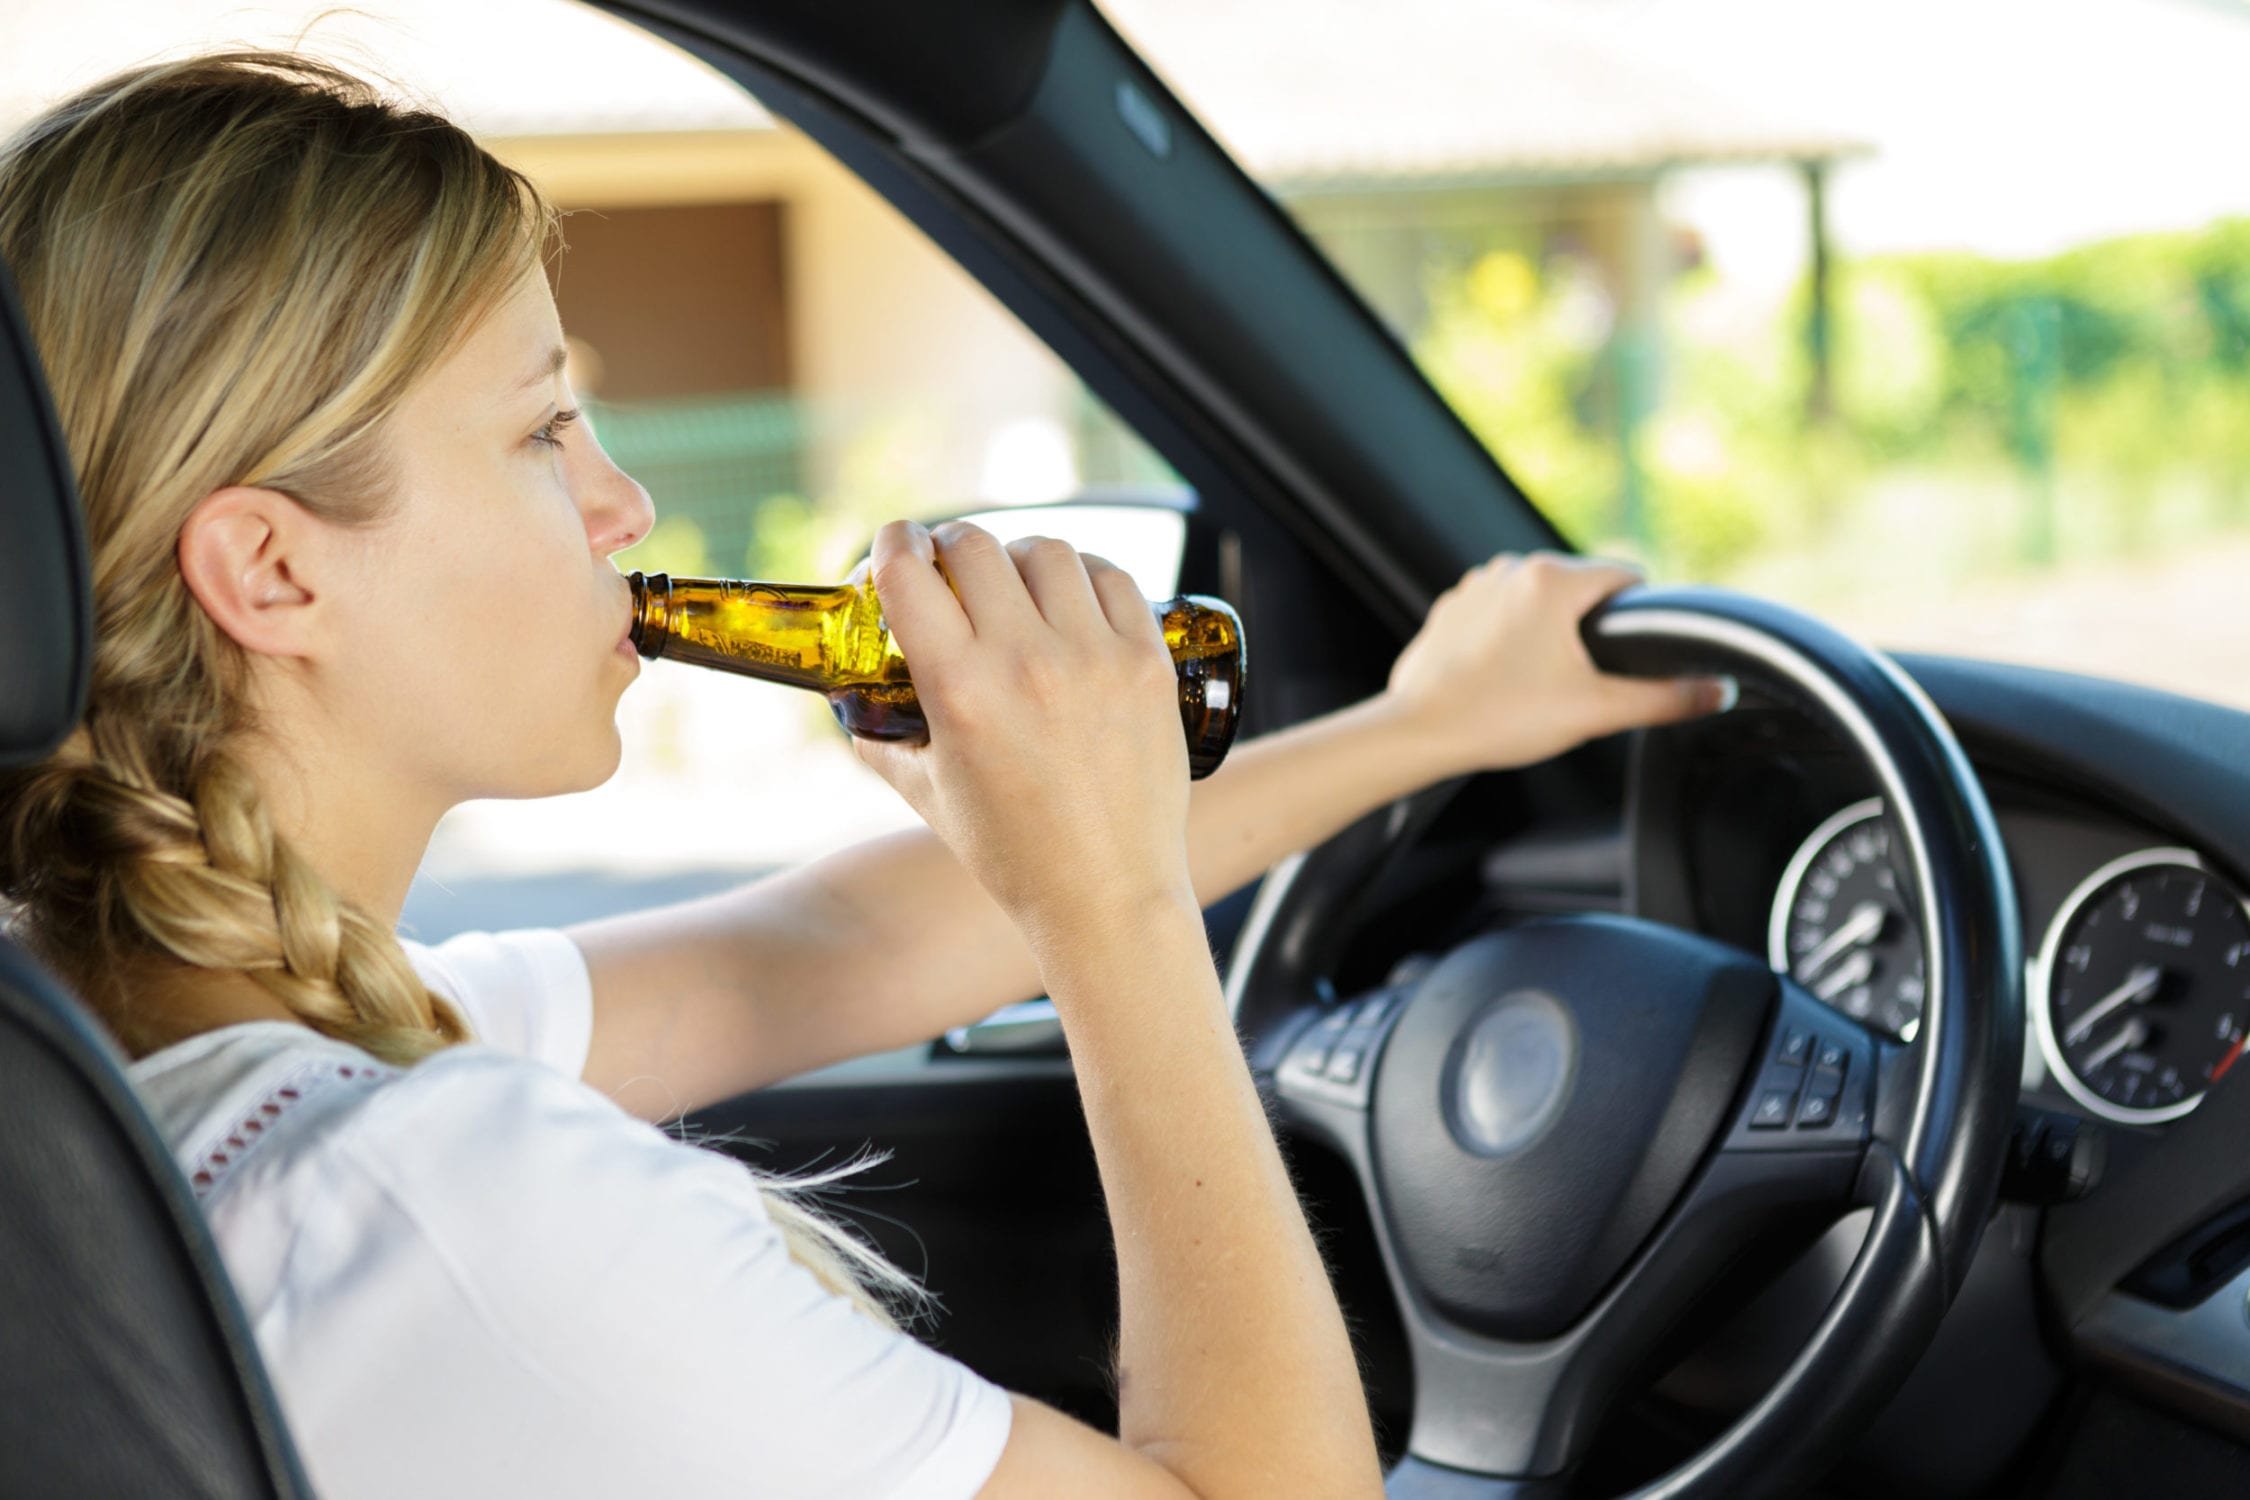 Underage DUI Lawyer in Baltimore, MD